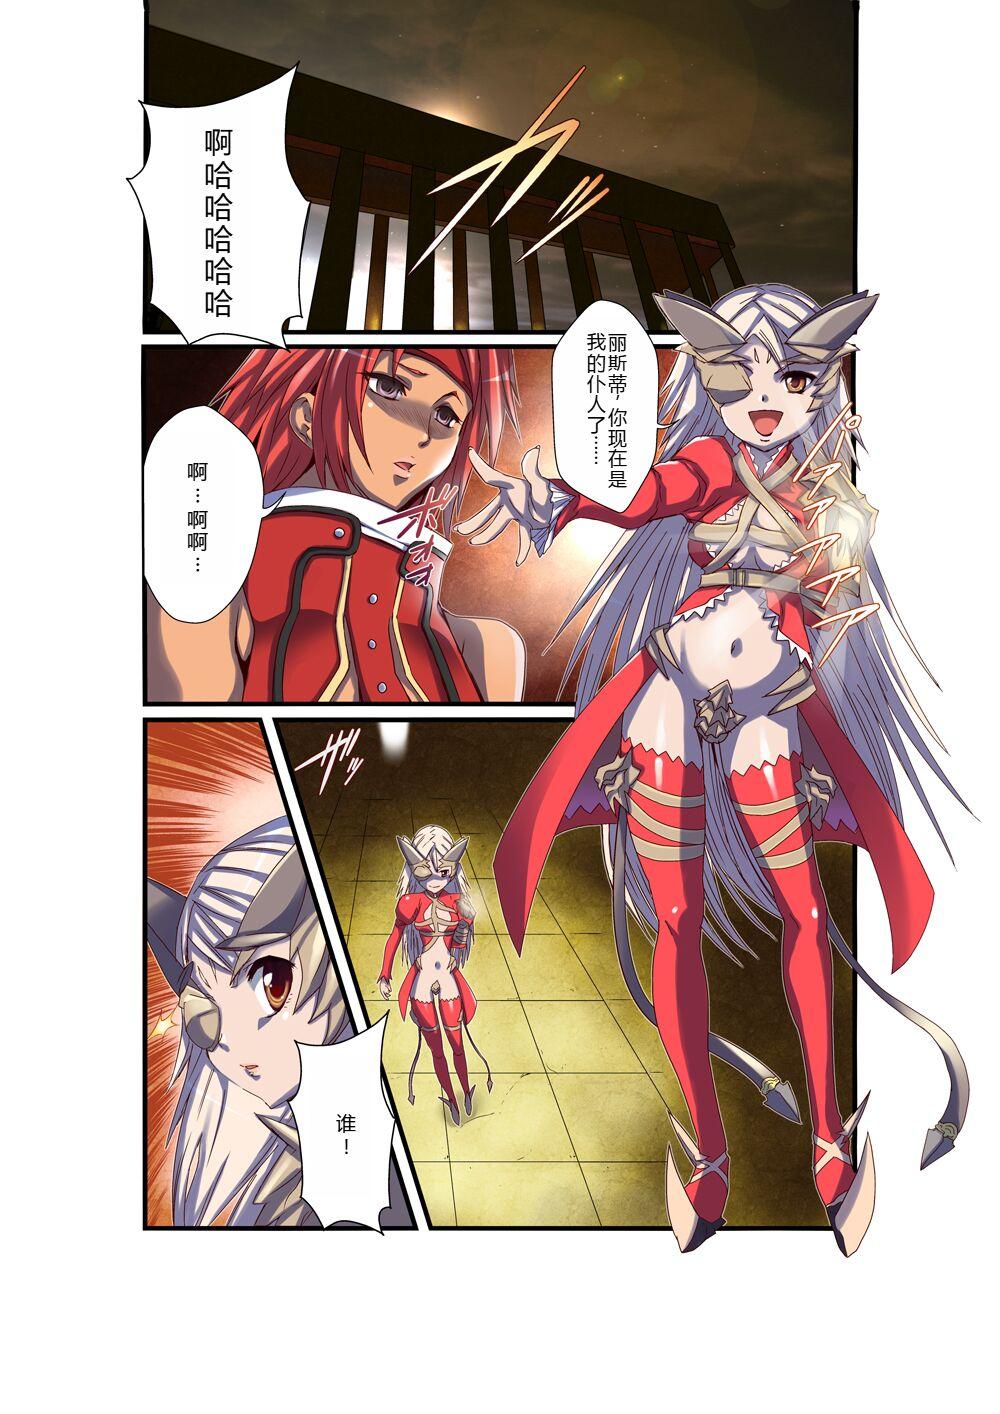 Ftv Girls Queen's *lade Mind-control Manga - Queens blade Cum In Mouth - Picture 1